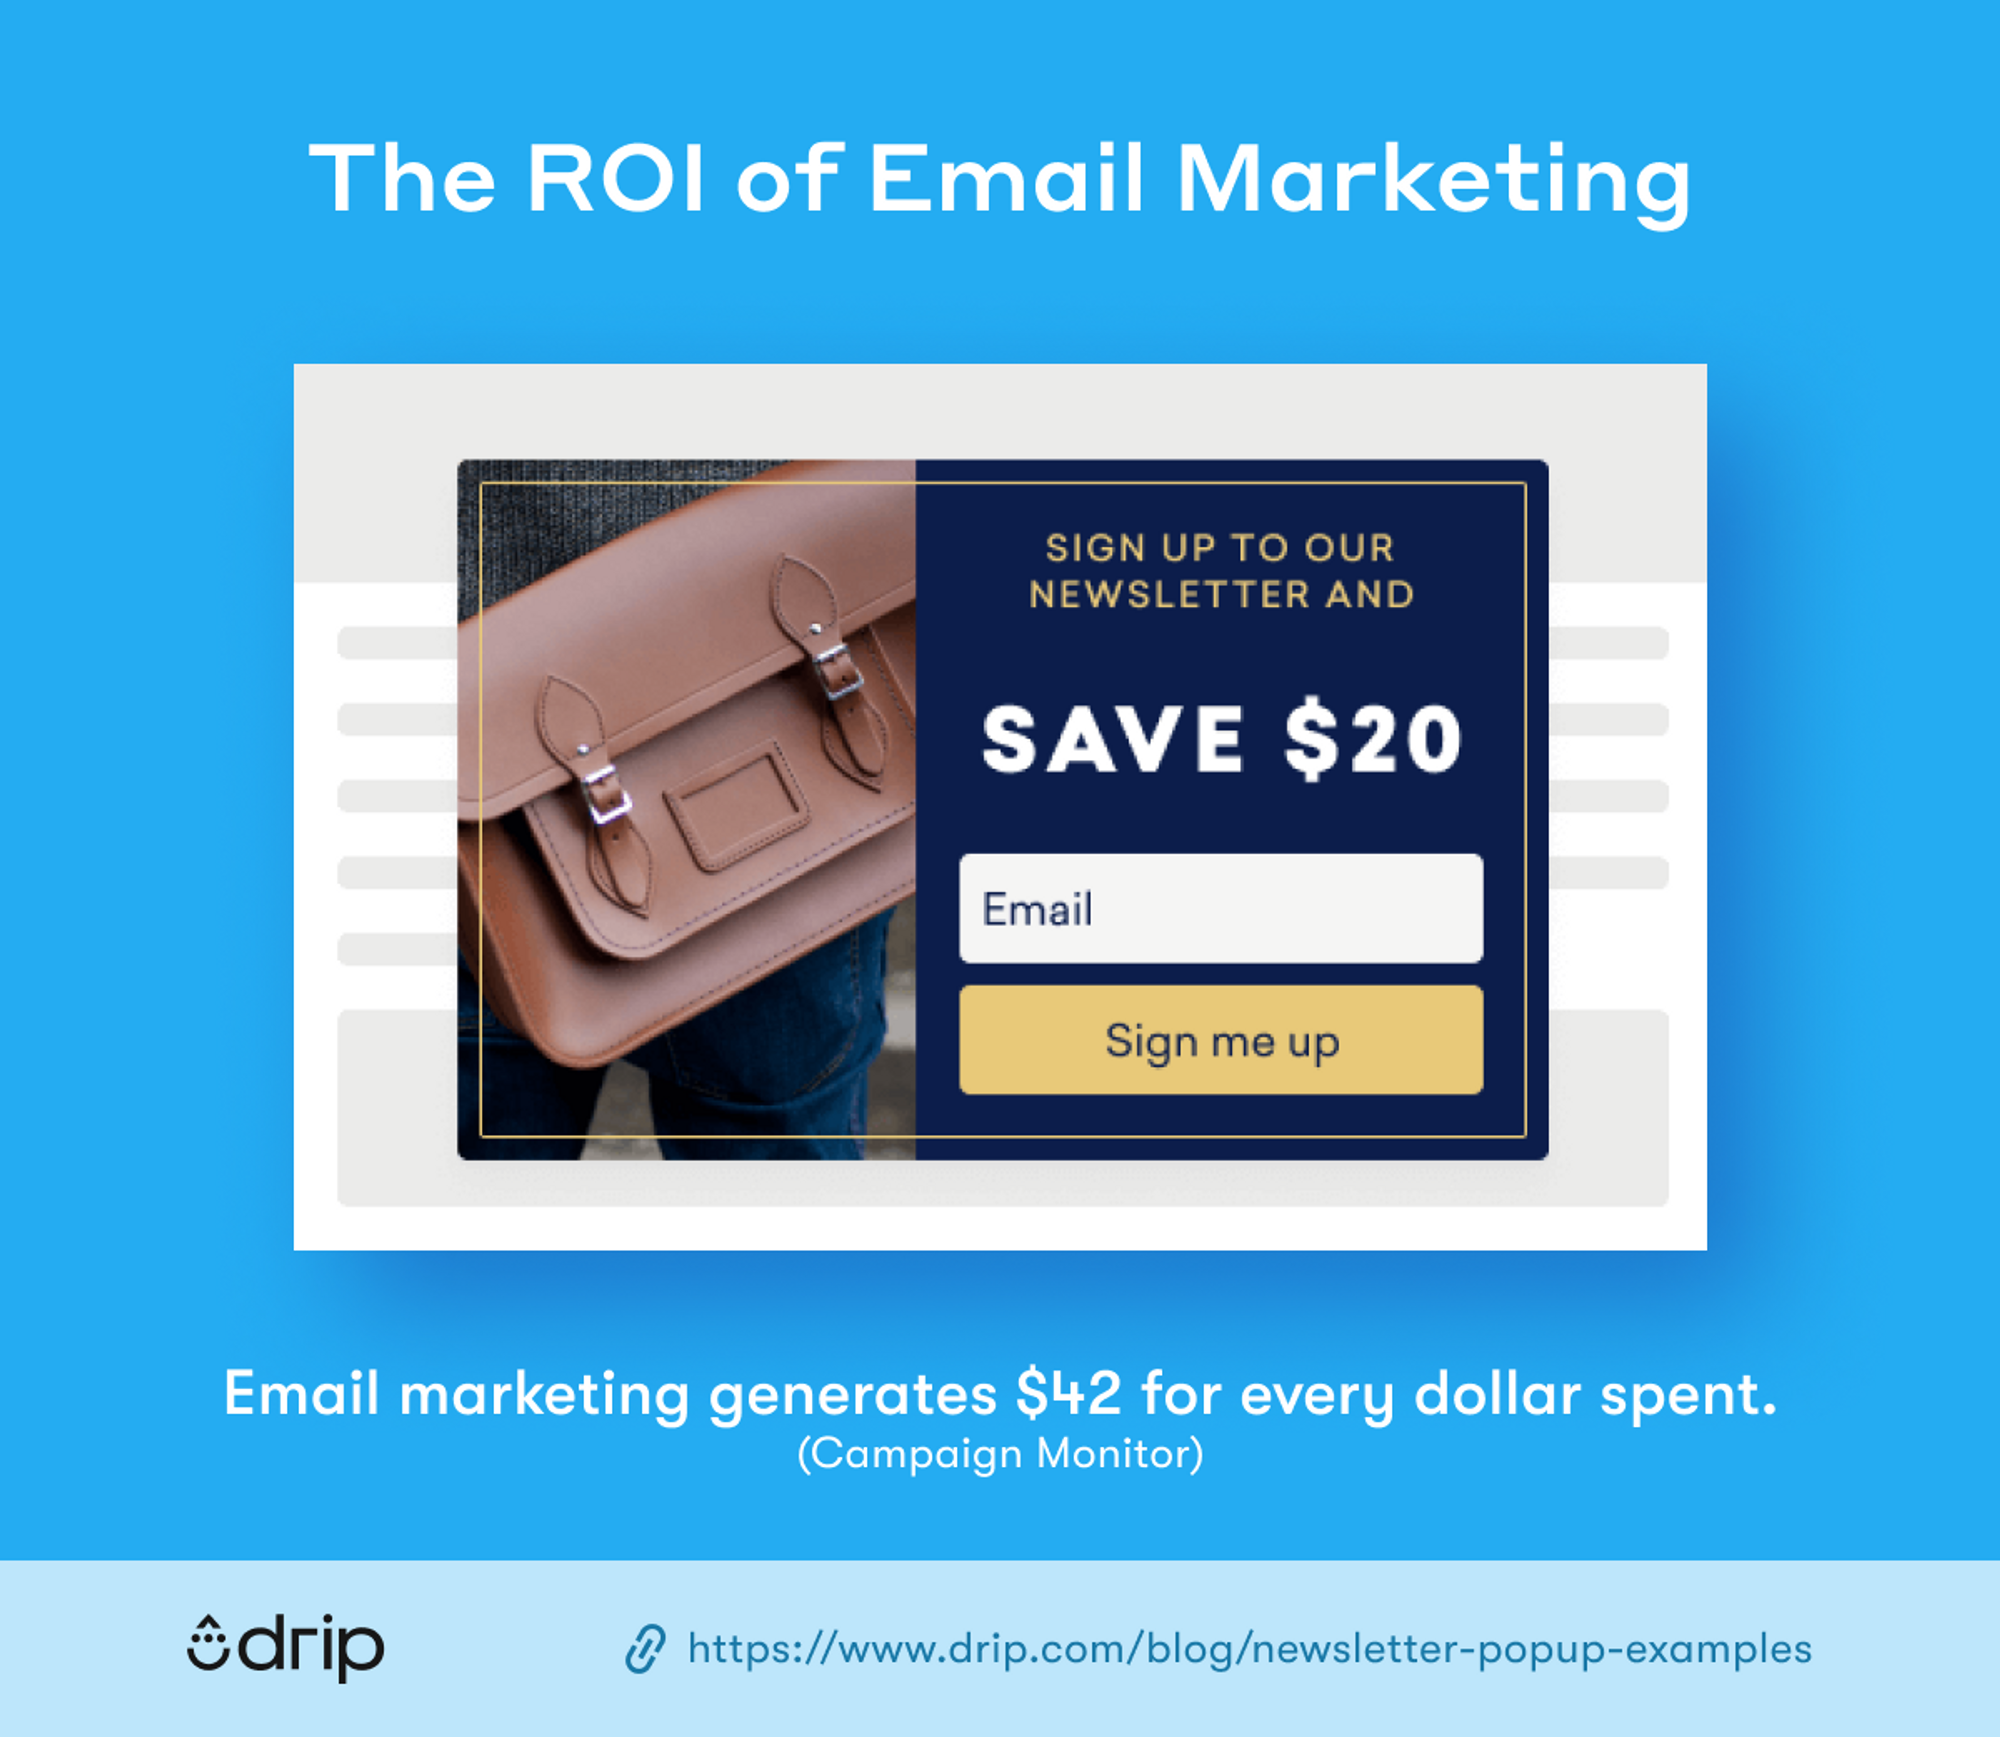 roi_of_email_marketing-popup